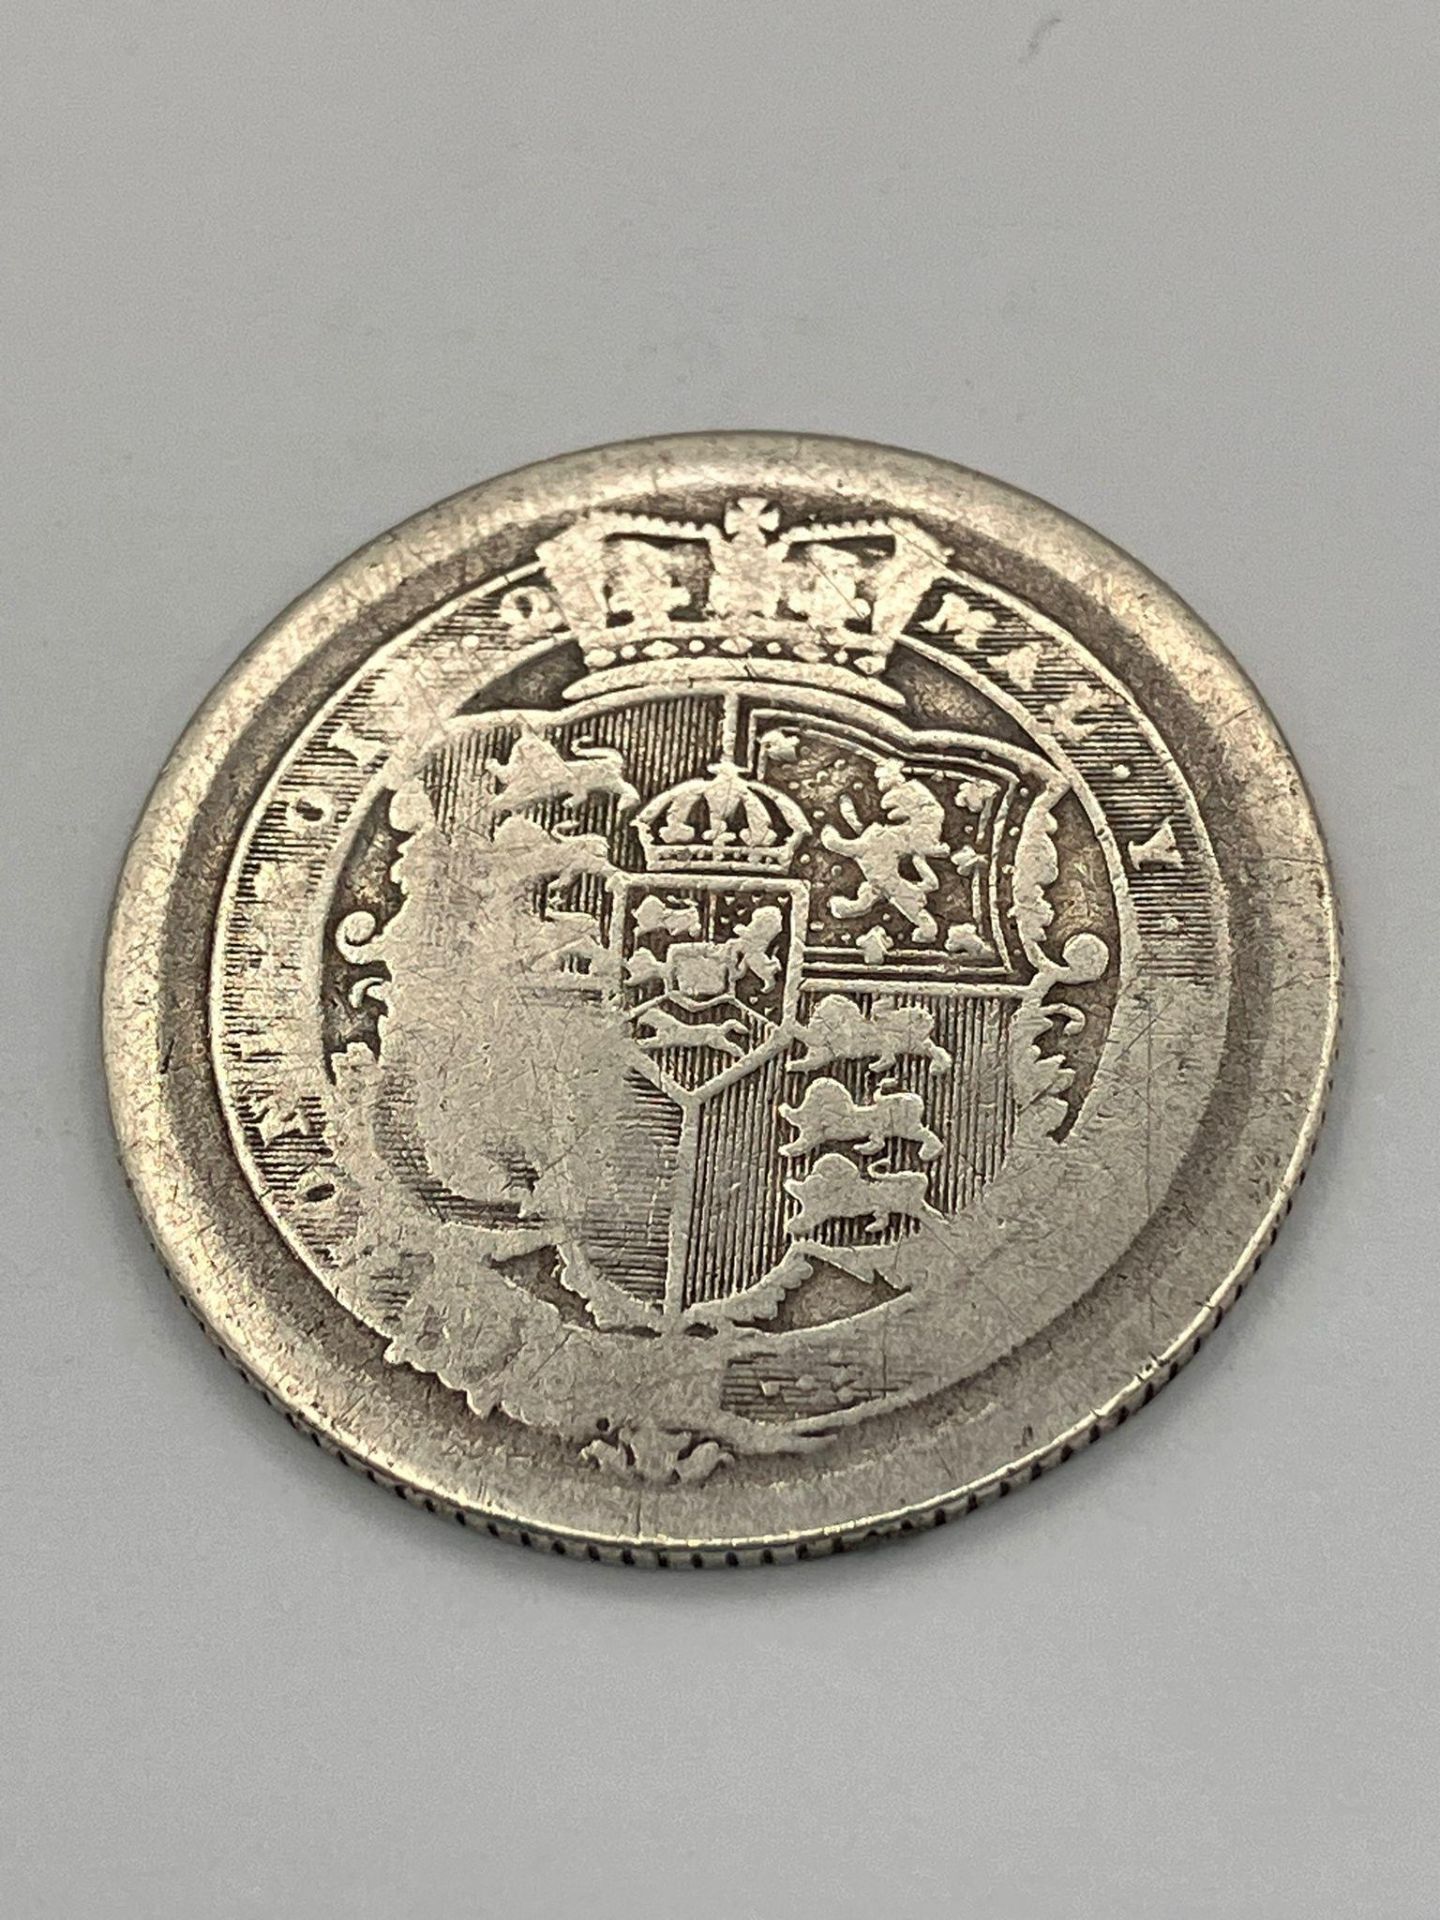 1817 GEORGE III SILVER ‘BULLHEAD’ SHILLING. Worn/almost fair condition. - Image 2 of 2